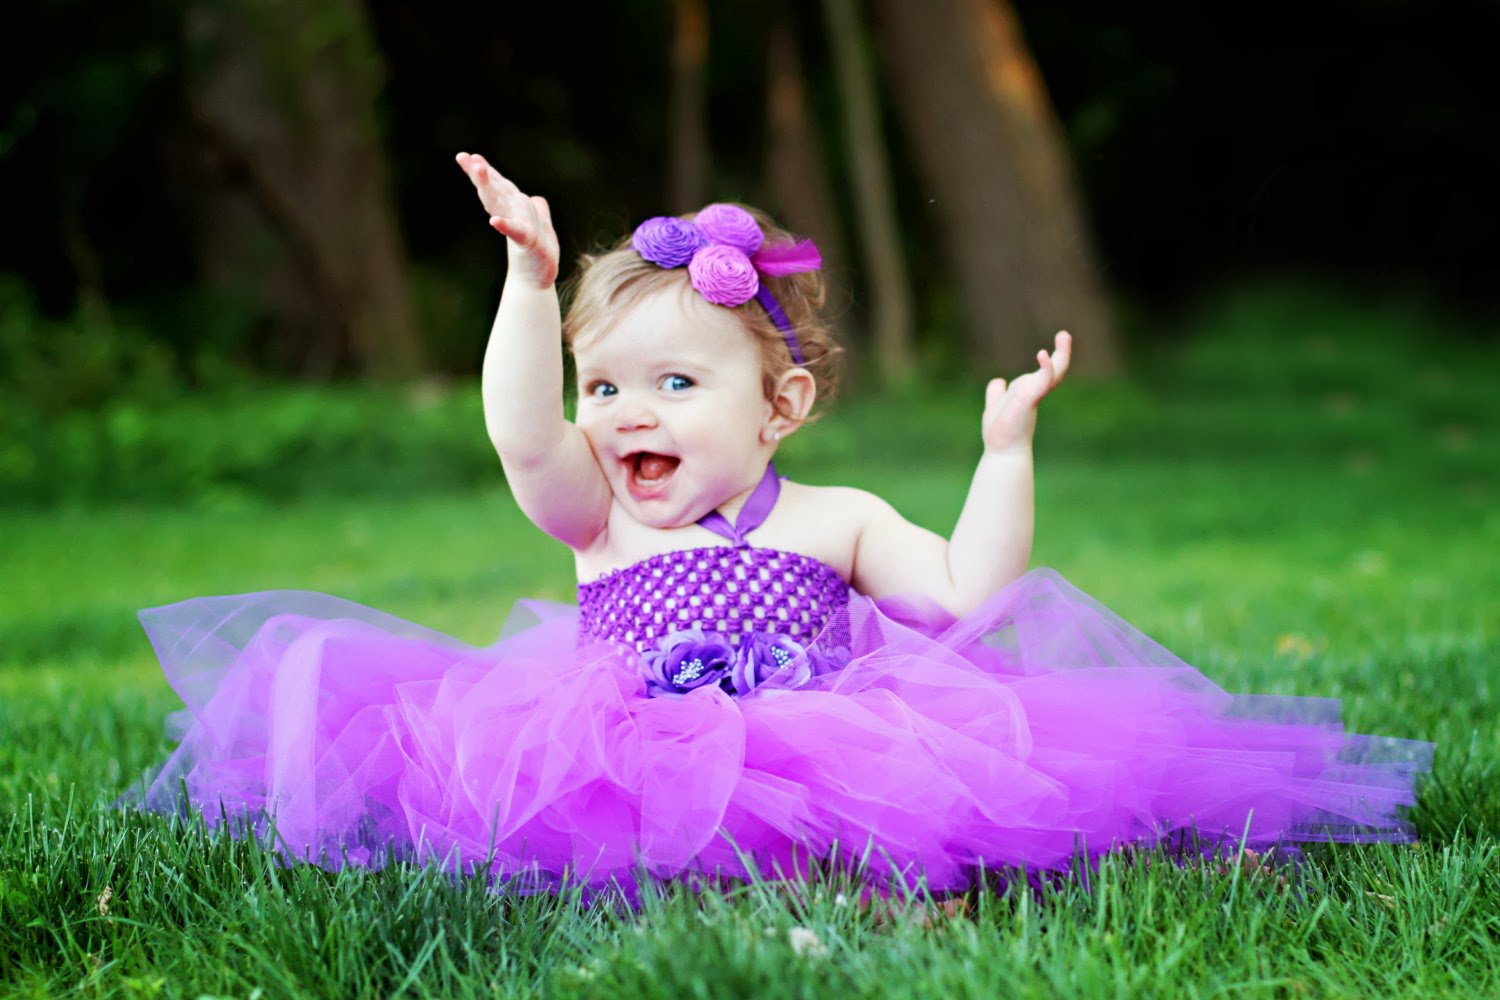 Free Download Latest Cute Baby Sweet Baby Hd Wallpaper In 1080p Super Hd 1500x1000 For Your Desktop Mobile Tablet Explore 49 Cute Baby Pics Wallpapers Cute Babies Wallpapers Free